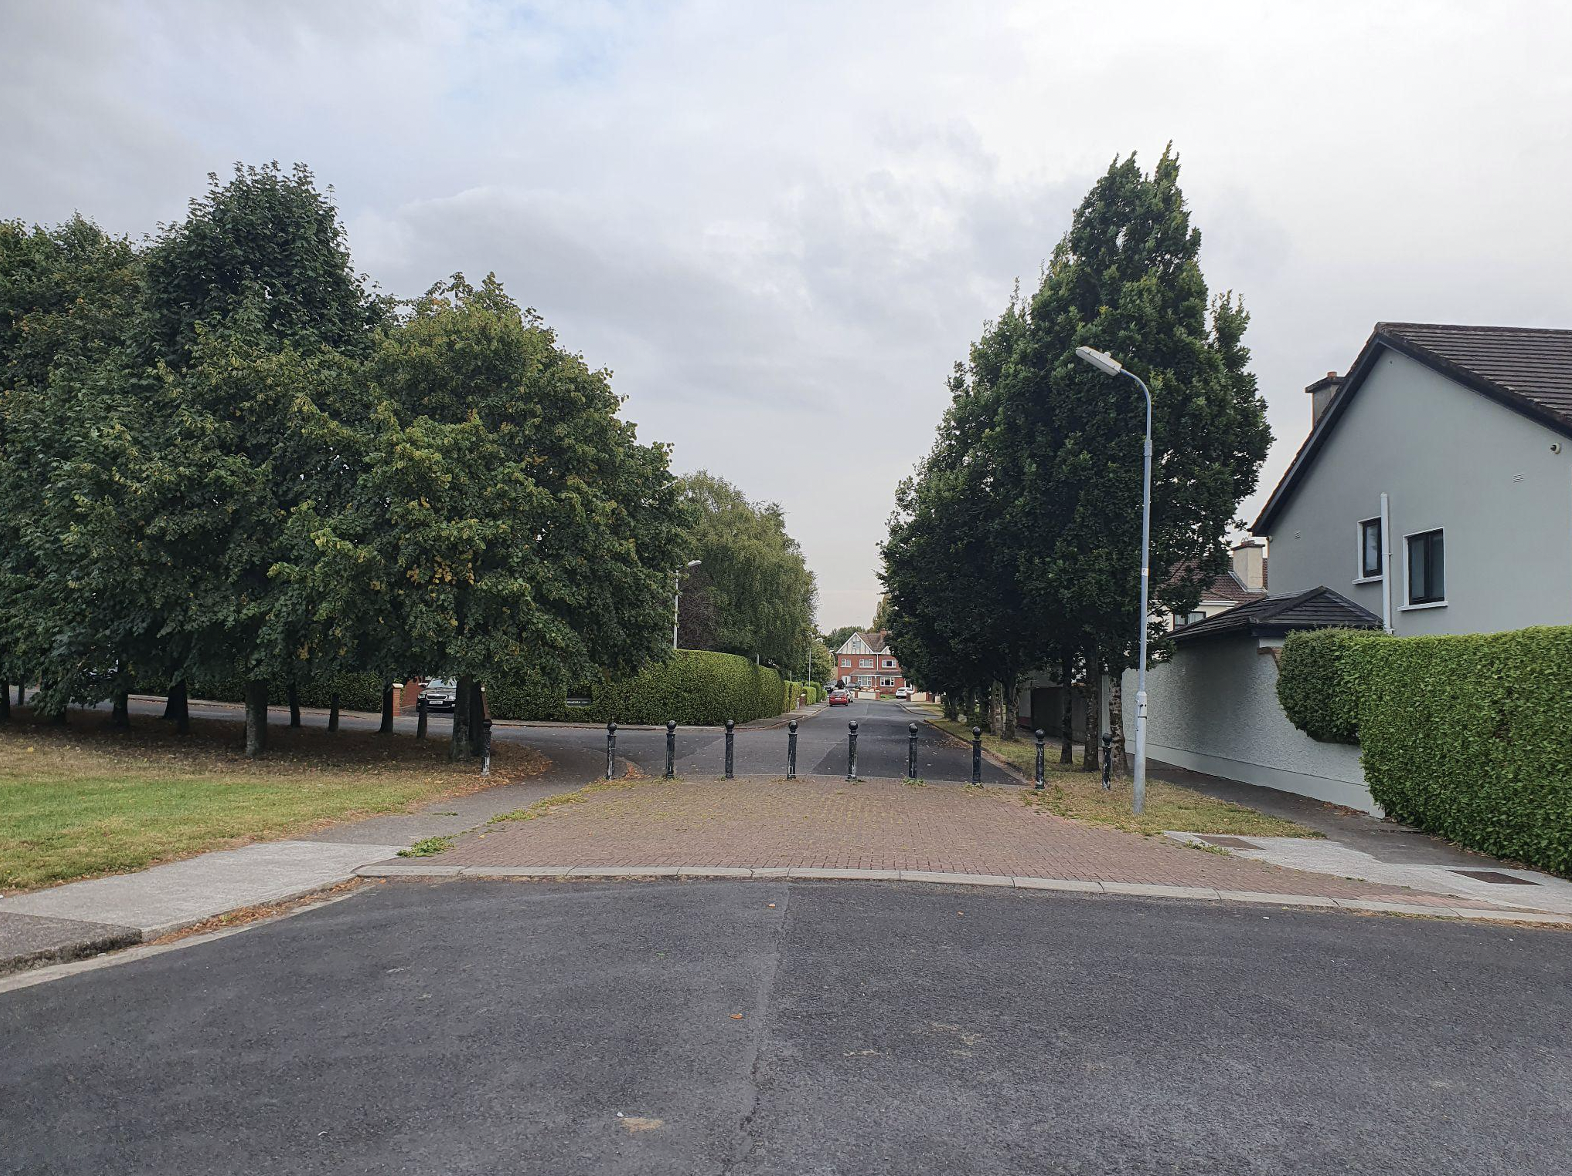 Ashbrooke Gardens Example of filtered permeability